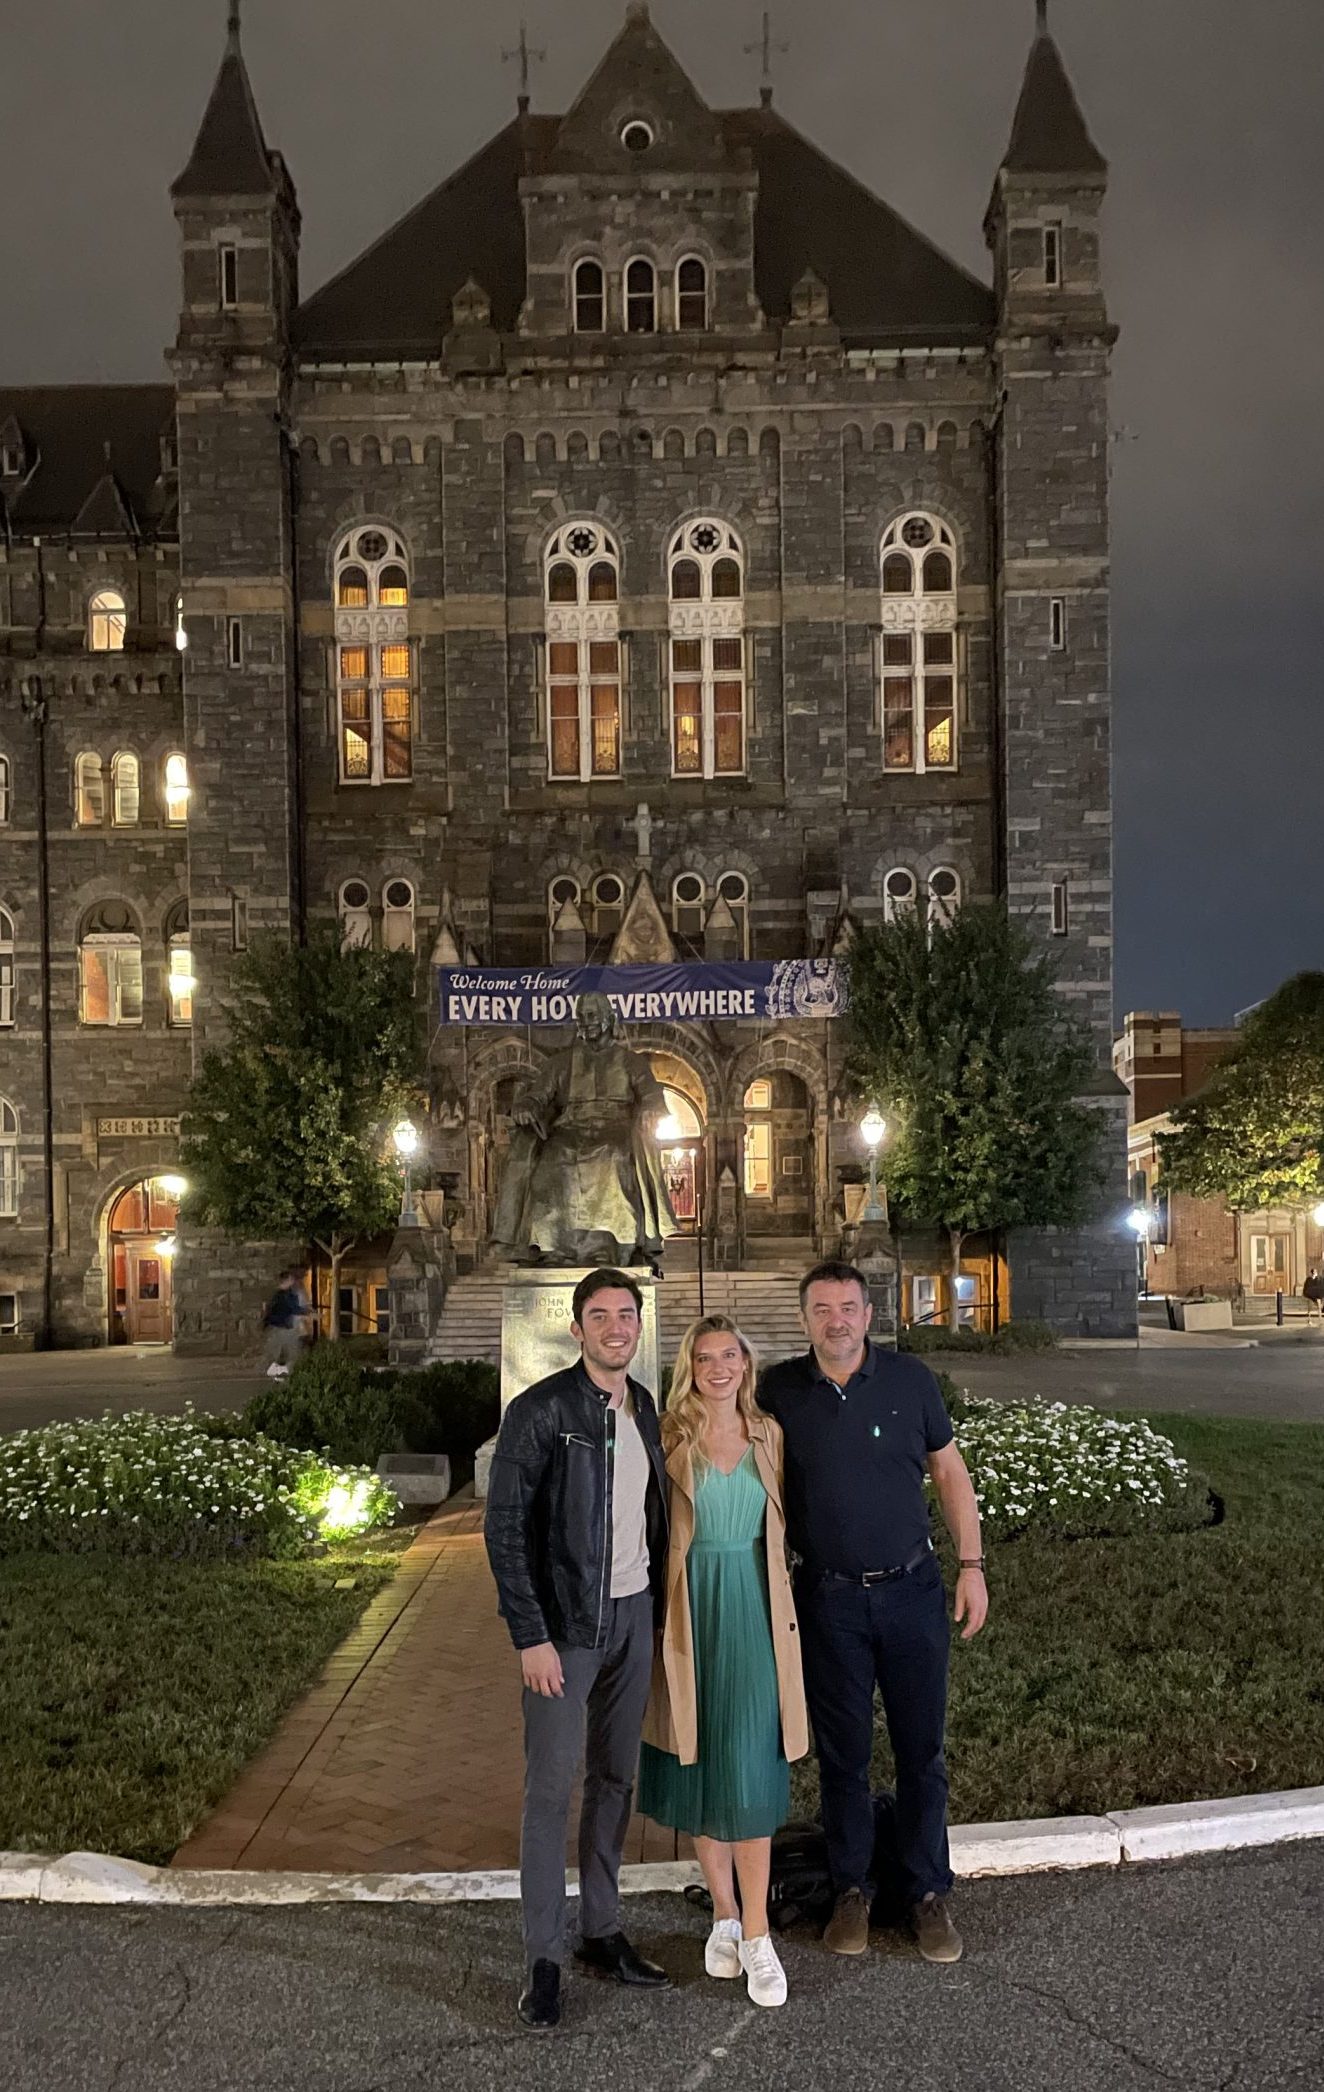 Ignac poses in front of Georgetown's Healy Hall next to a woman his age and an older man.